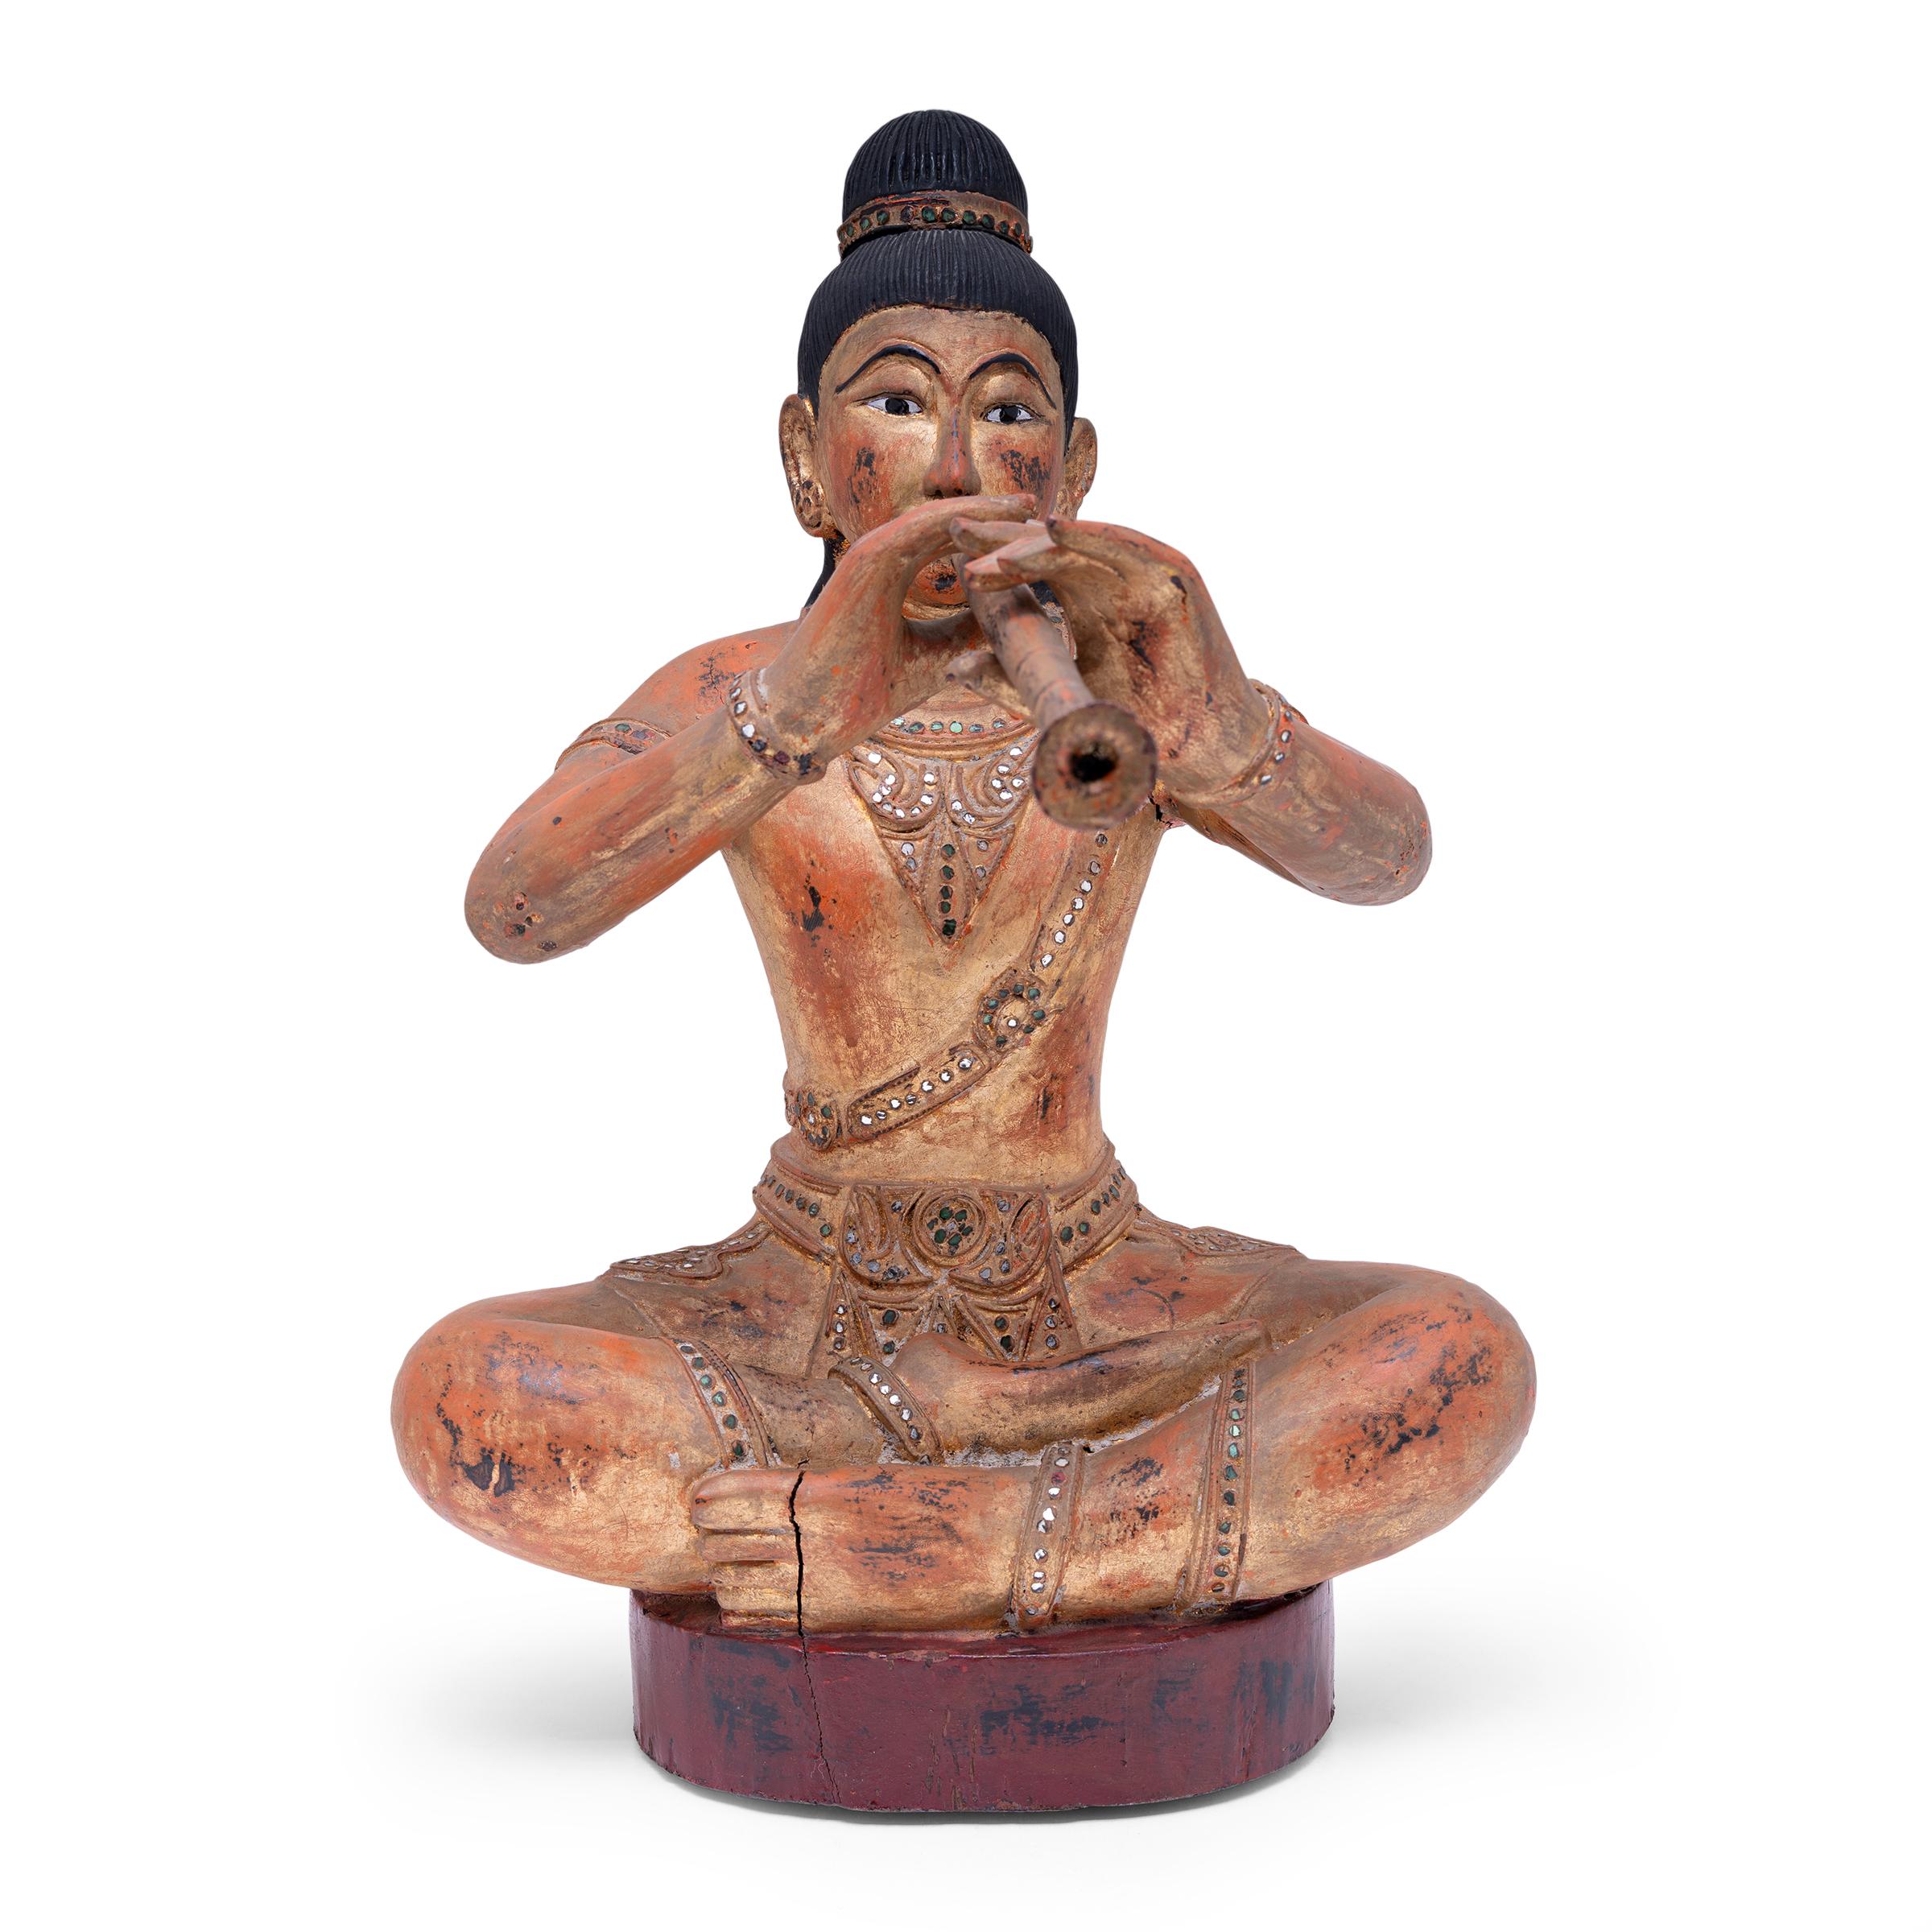 This seated Burmese figure captures a musician in eternal song. The wooden figure is hand-carved with a seated posture, legs crossed and arms outstretched to hold her instrument, most likely a flute or double-reeded horn. The musician is depicted in